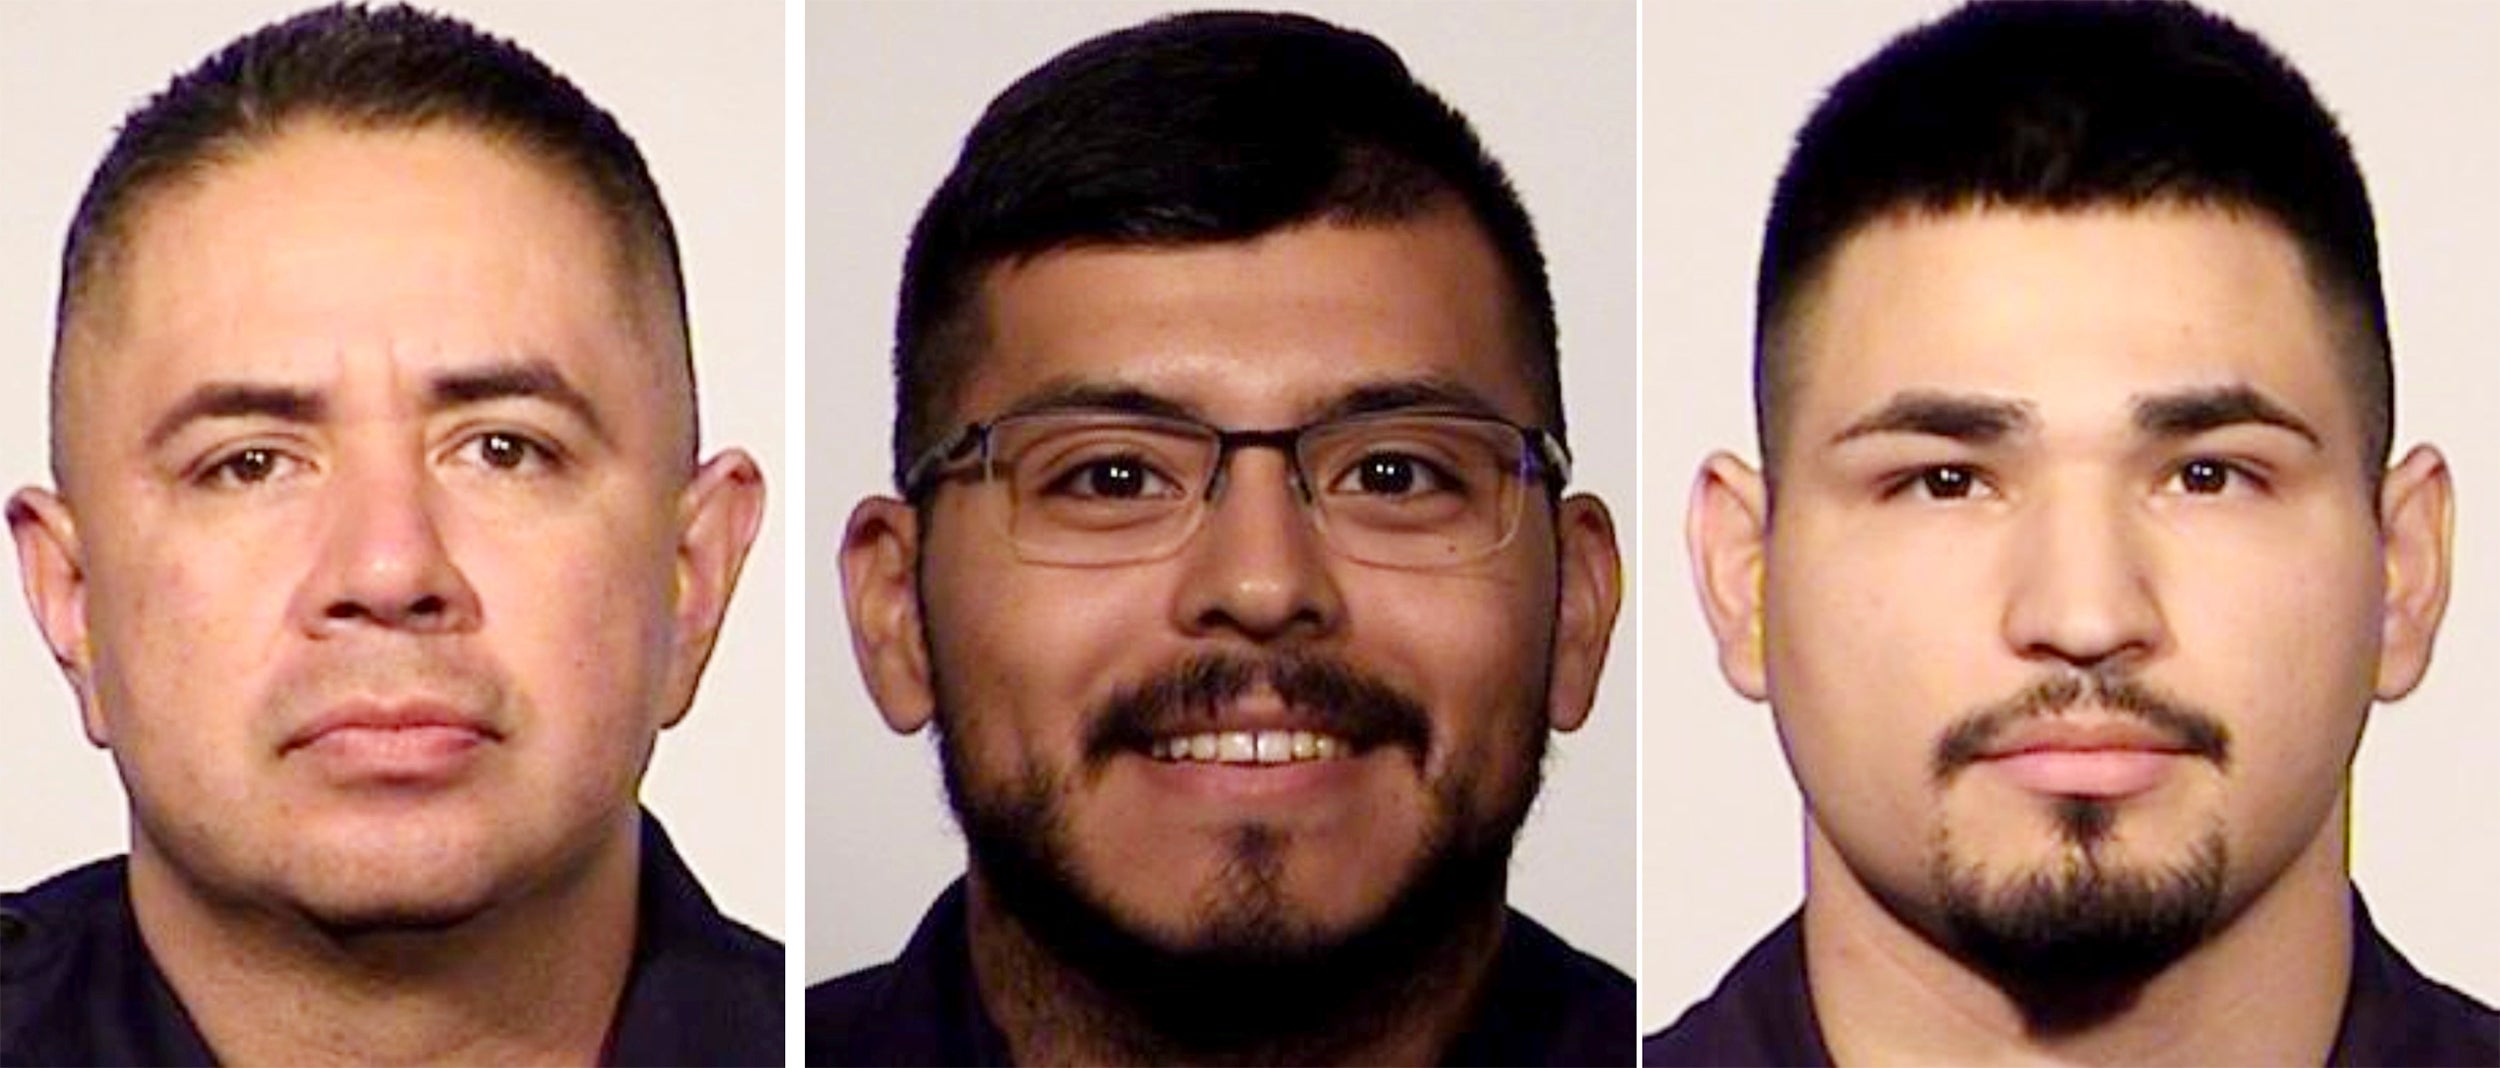 From left to right: San Antonio police Sergeant Alfred Flores and officers Eleazar Alejandro and Nathaniel Villalobos were charged with murder after the fatal shooting of Melissa Perez on 23 June